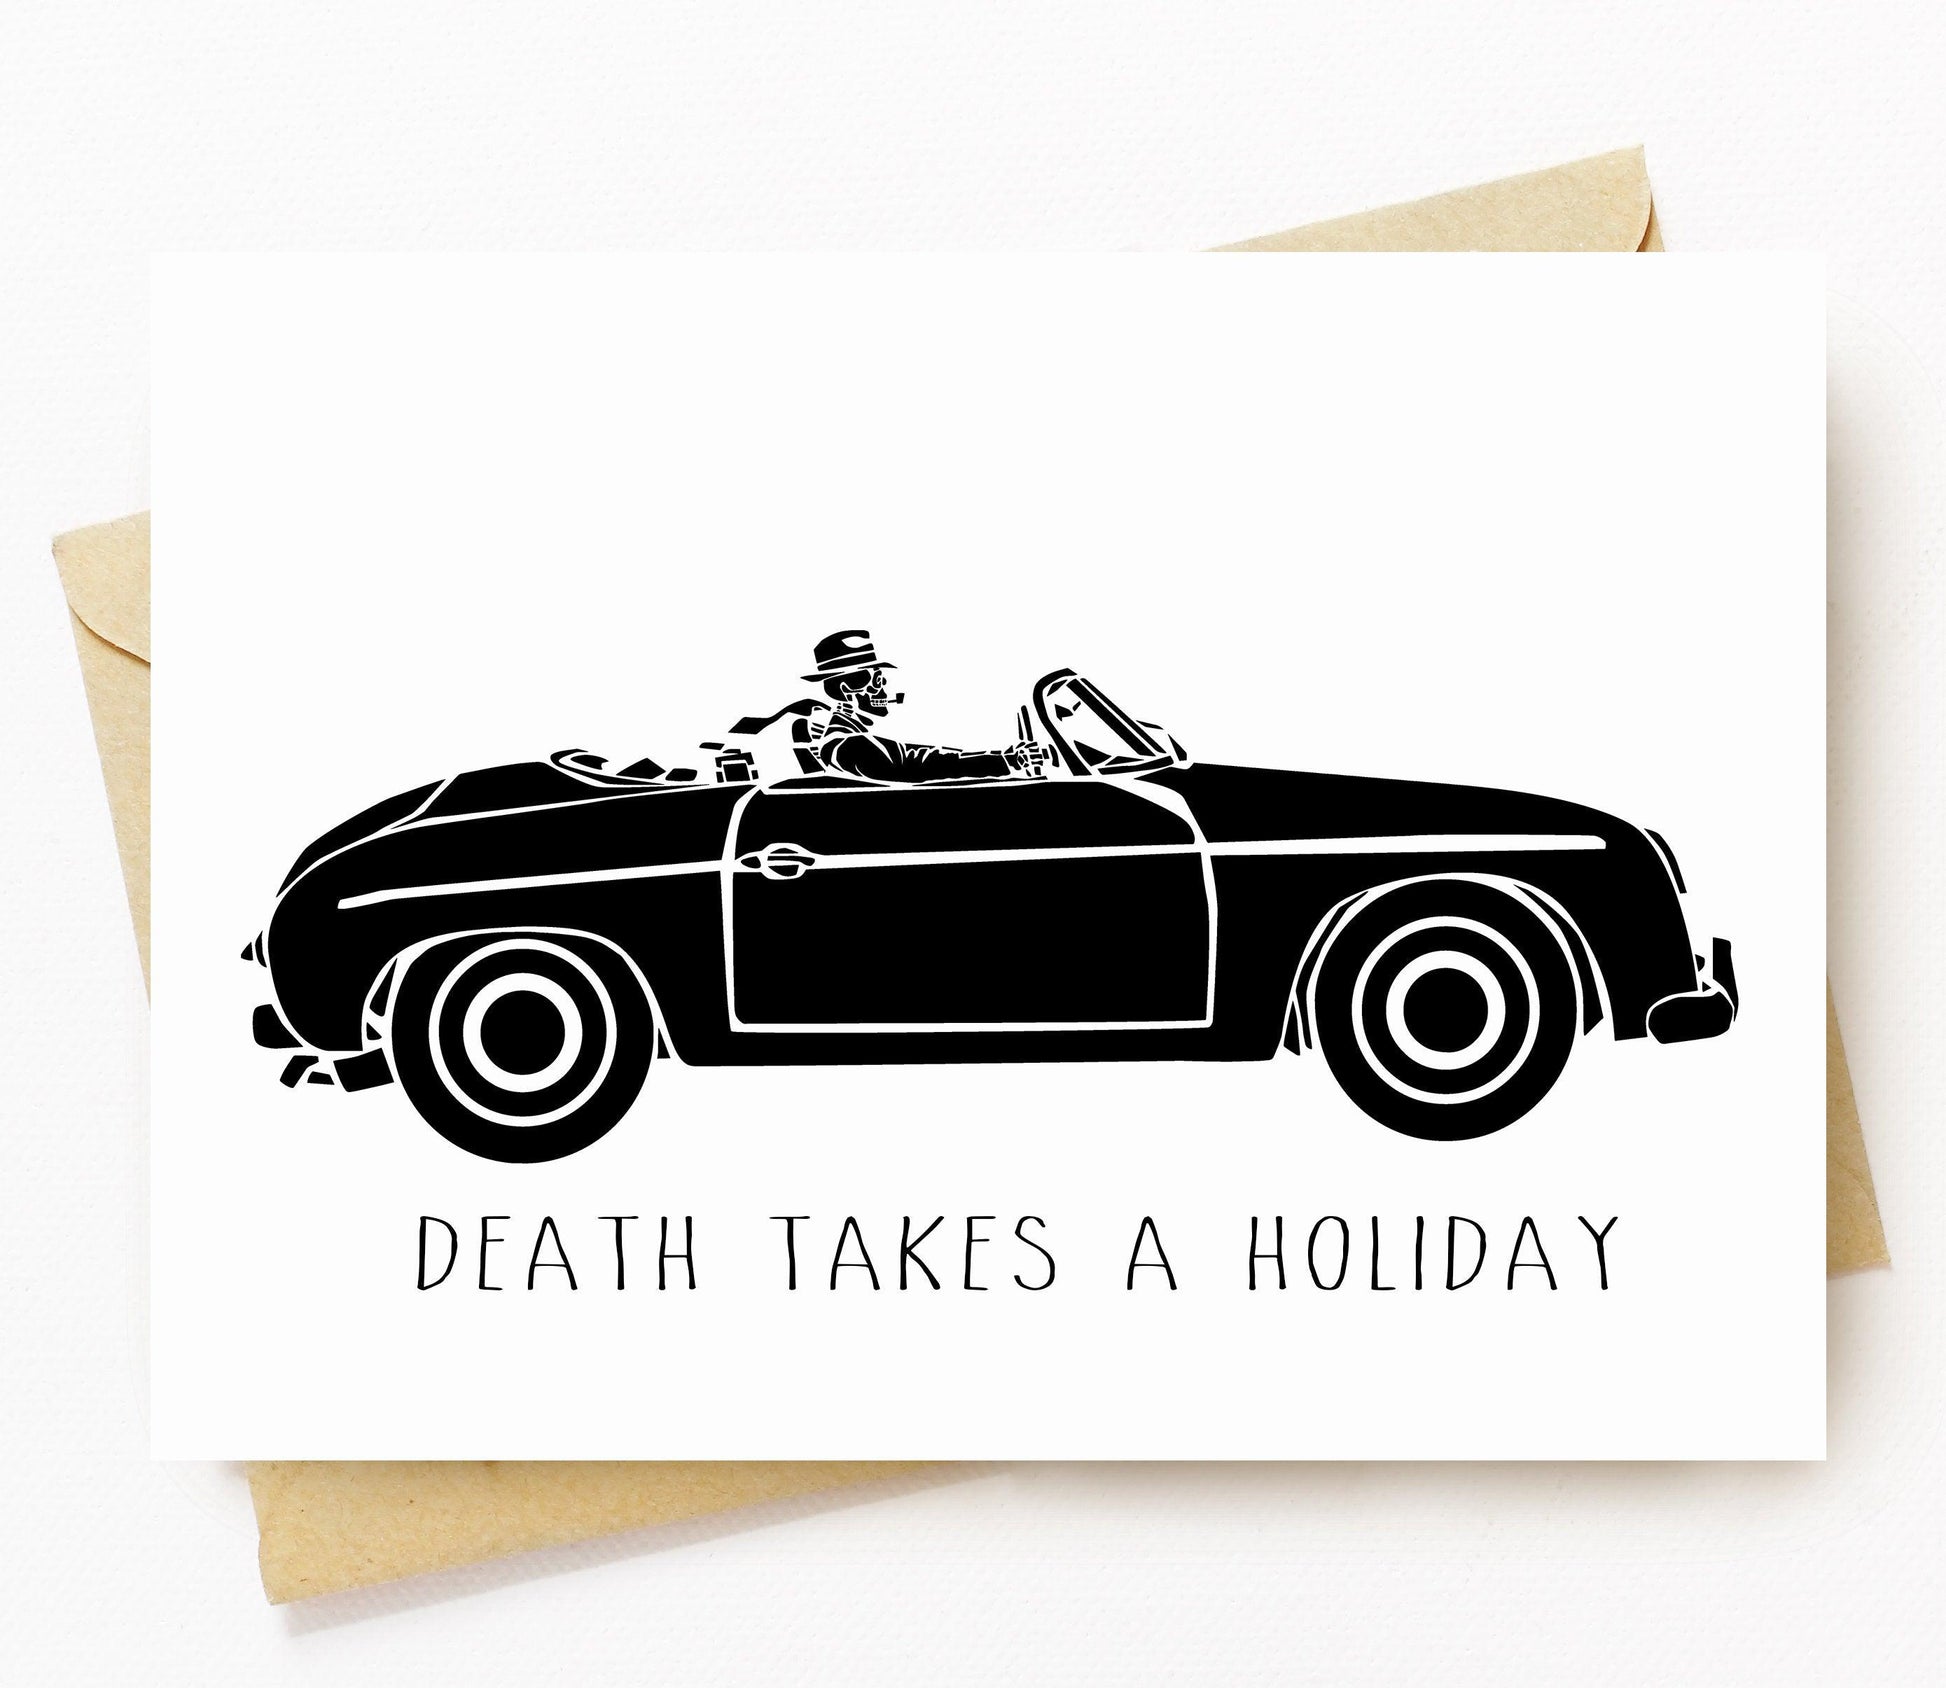 BellavanceInk: Greeting Card With Death Taking a Holiday  5 x 7 Inches - BellavanceInk